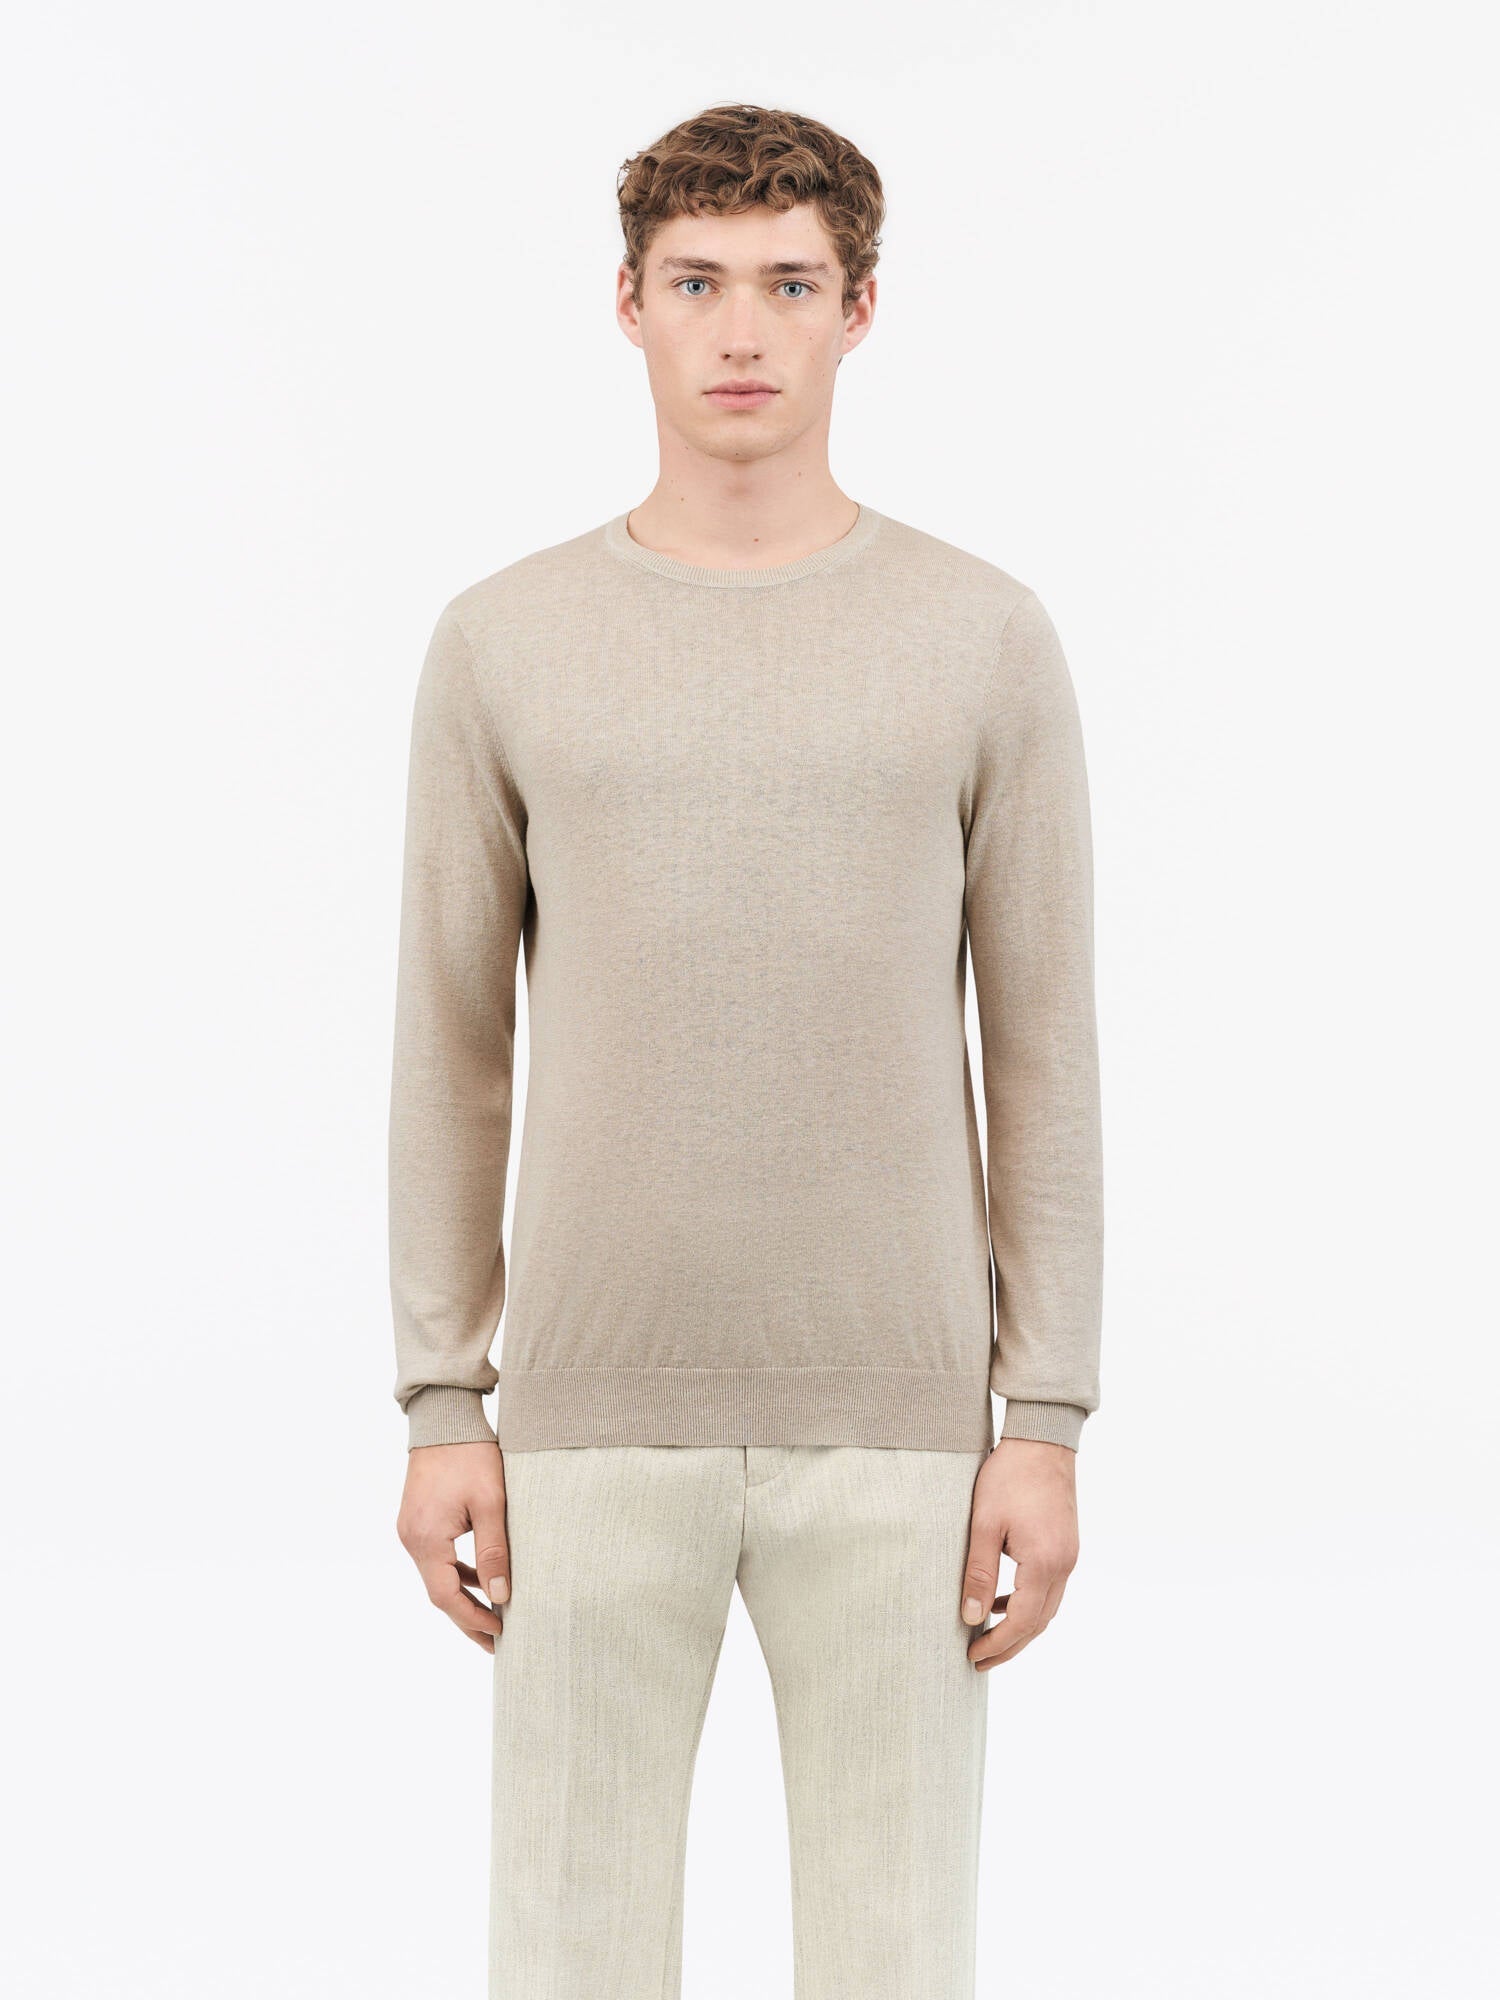 TIGER OF SWEDEN Michas Pullover in Light Beige T72307001| eightywingold 